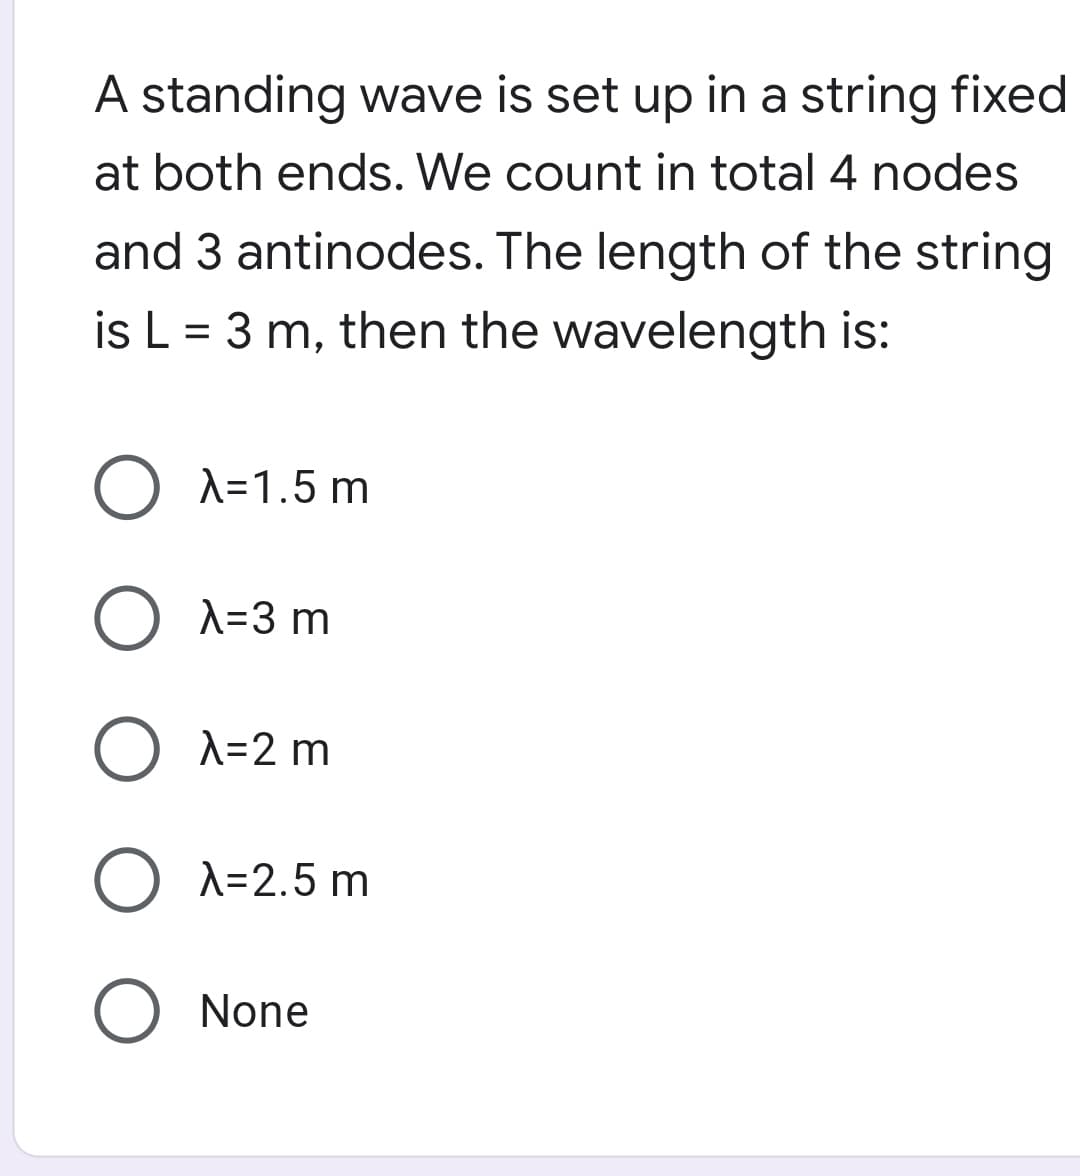 A standing wave is set up in a string fixed
at both ends. We count in total 4 nodes
and 3 antinodes. The length of the string
is L = 3 m, then the wavelength is:
O A=1.5 m
O A=3 m
A=2 m
A=2.5 m
None
